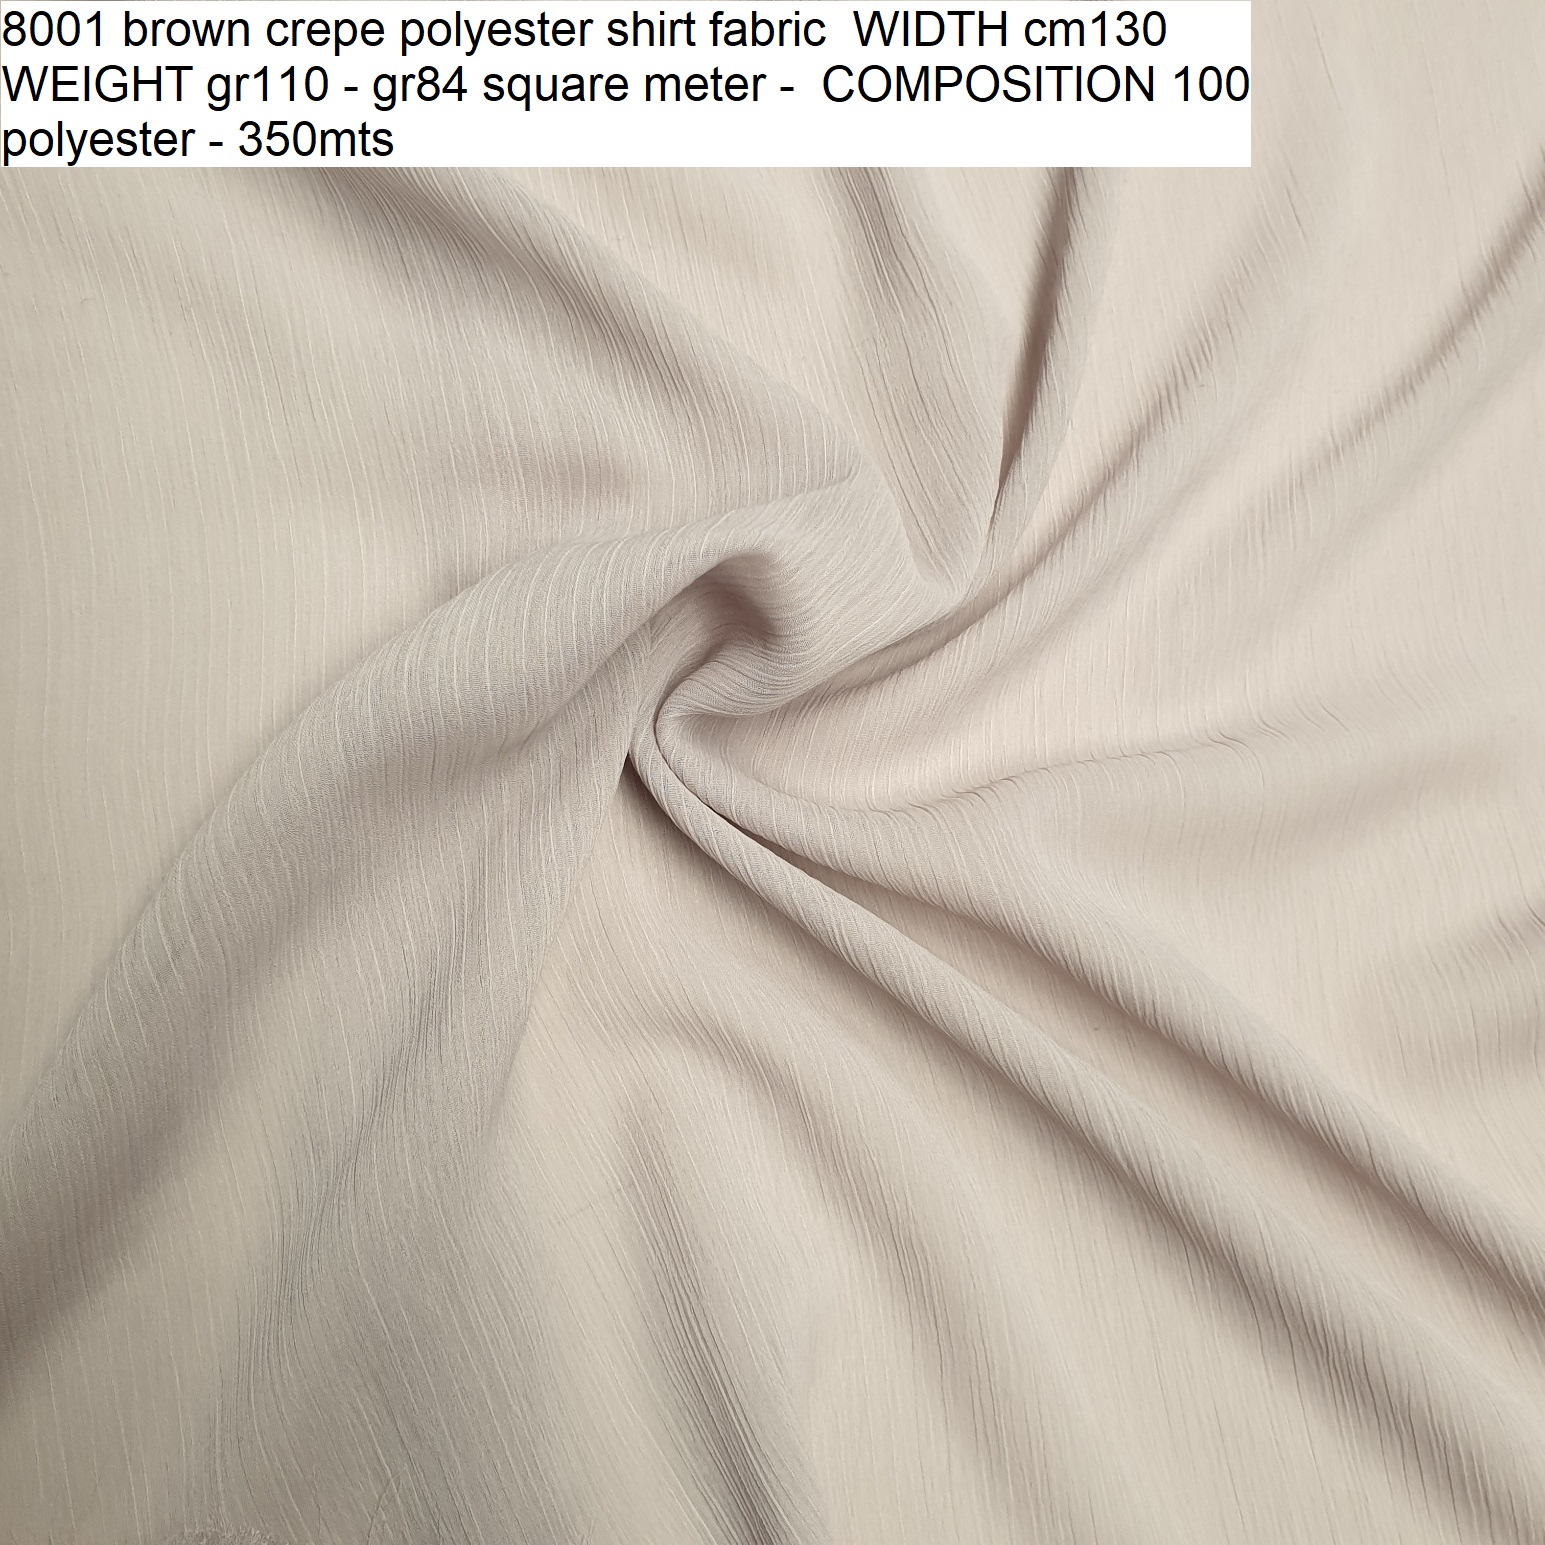 8001 brown crepe polyester shirt fabric WIDTH cm130 WEIGHT gr110 - gr84 square meter - COMPOSITION 100 polyester - 350mts